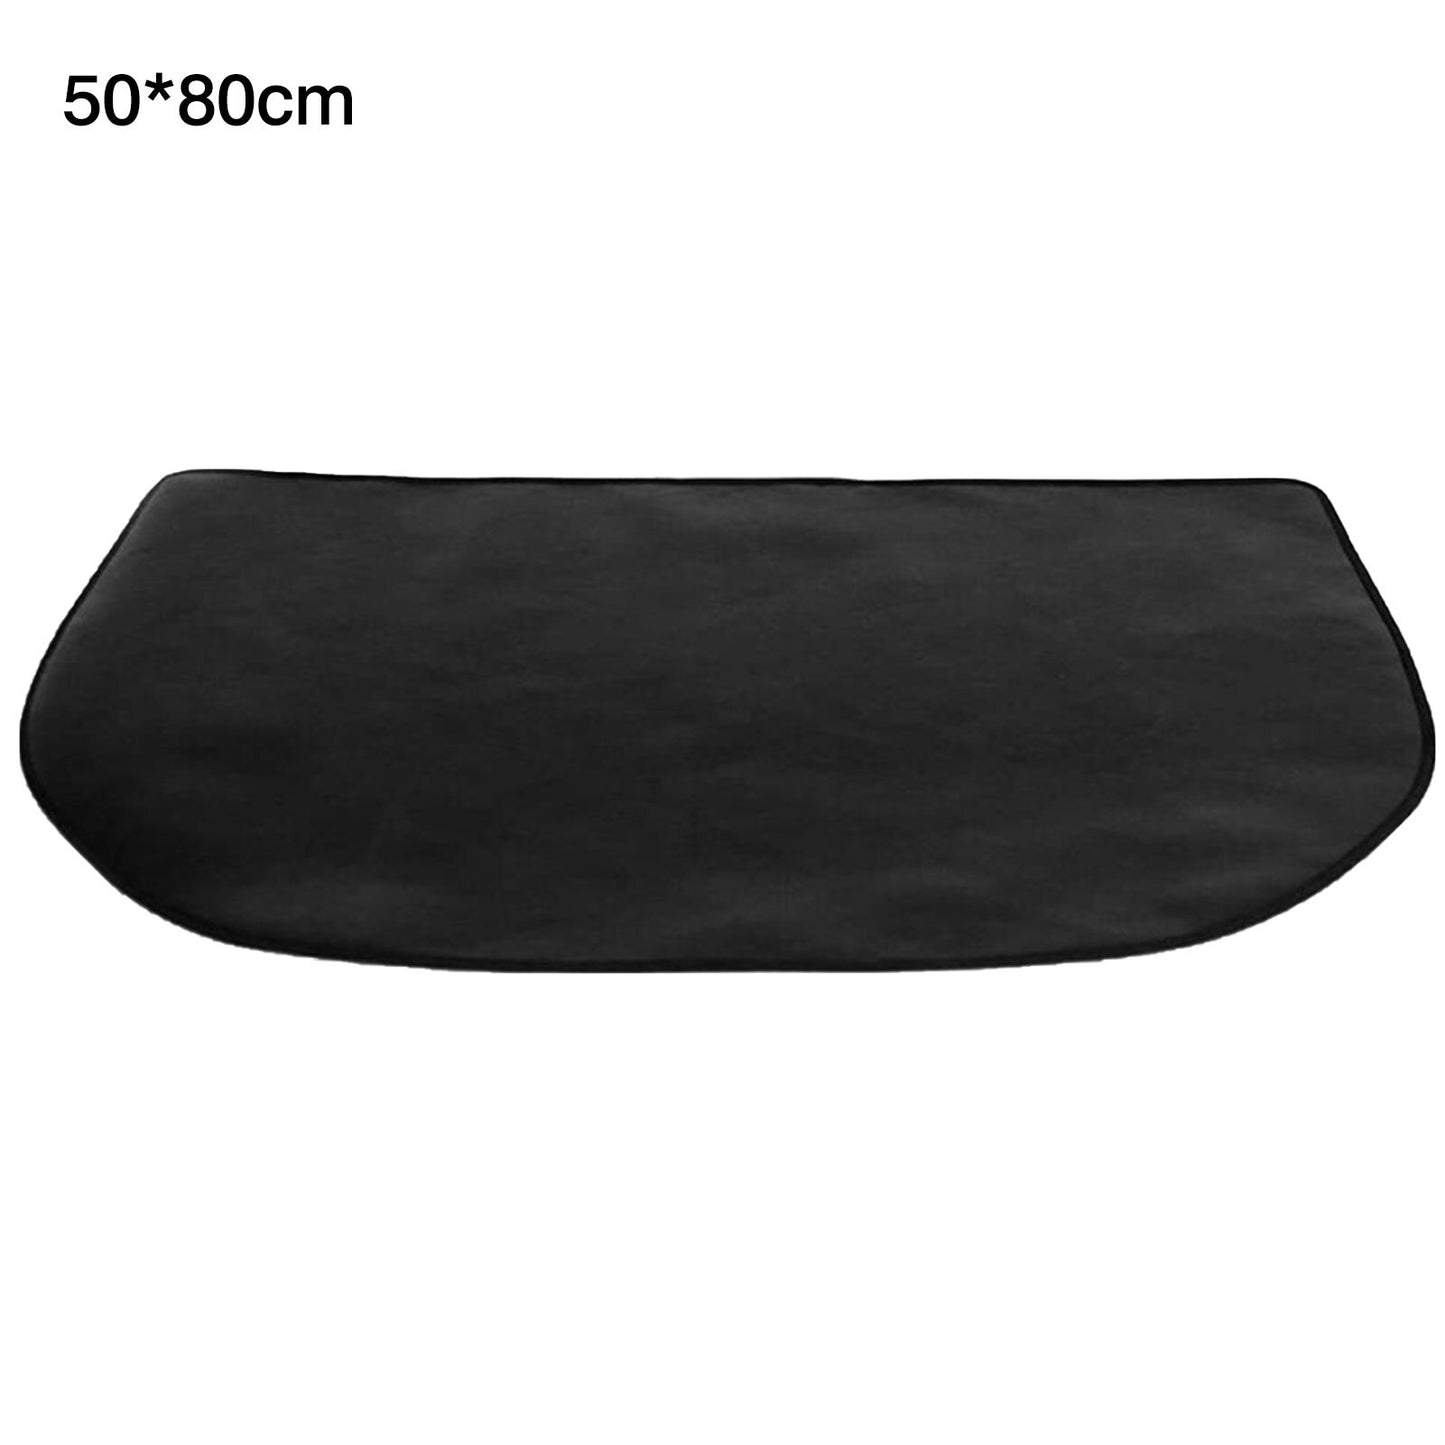 Fire Retardant Heat Insulation Black/Gray Fireplace Carpet Non-slip Mat Survival Emergency Blankets For Fireplace Camping Supply